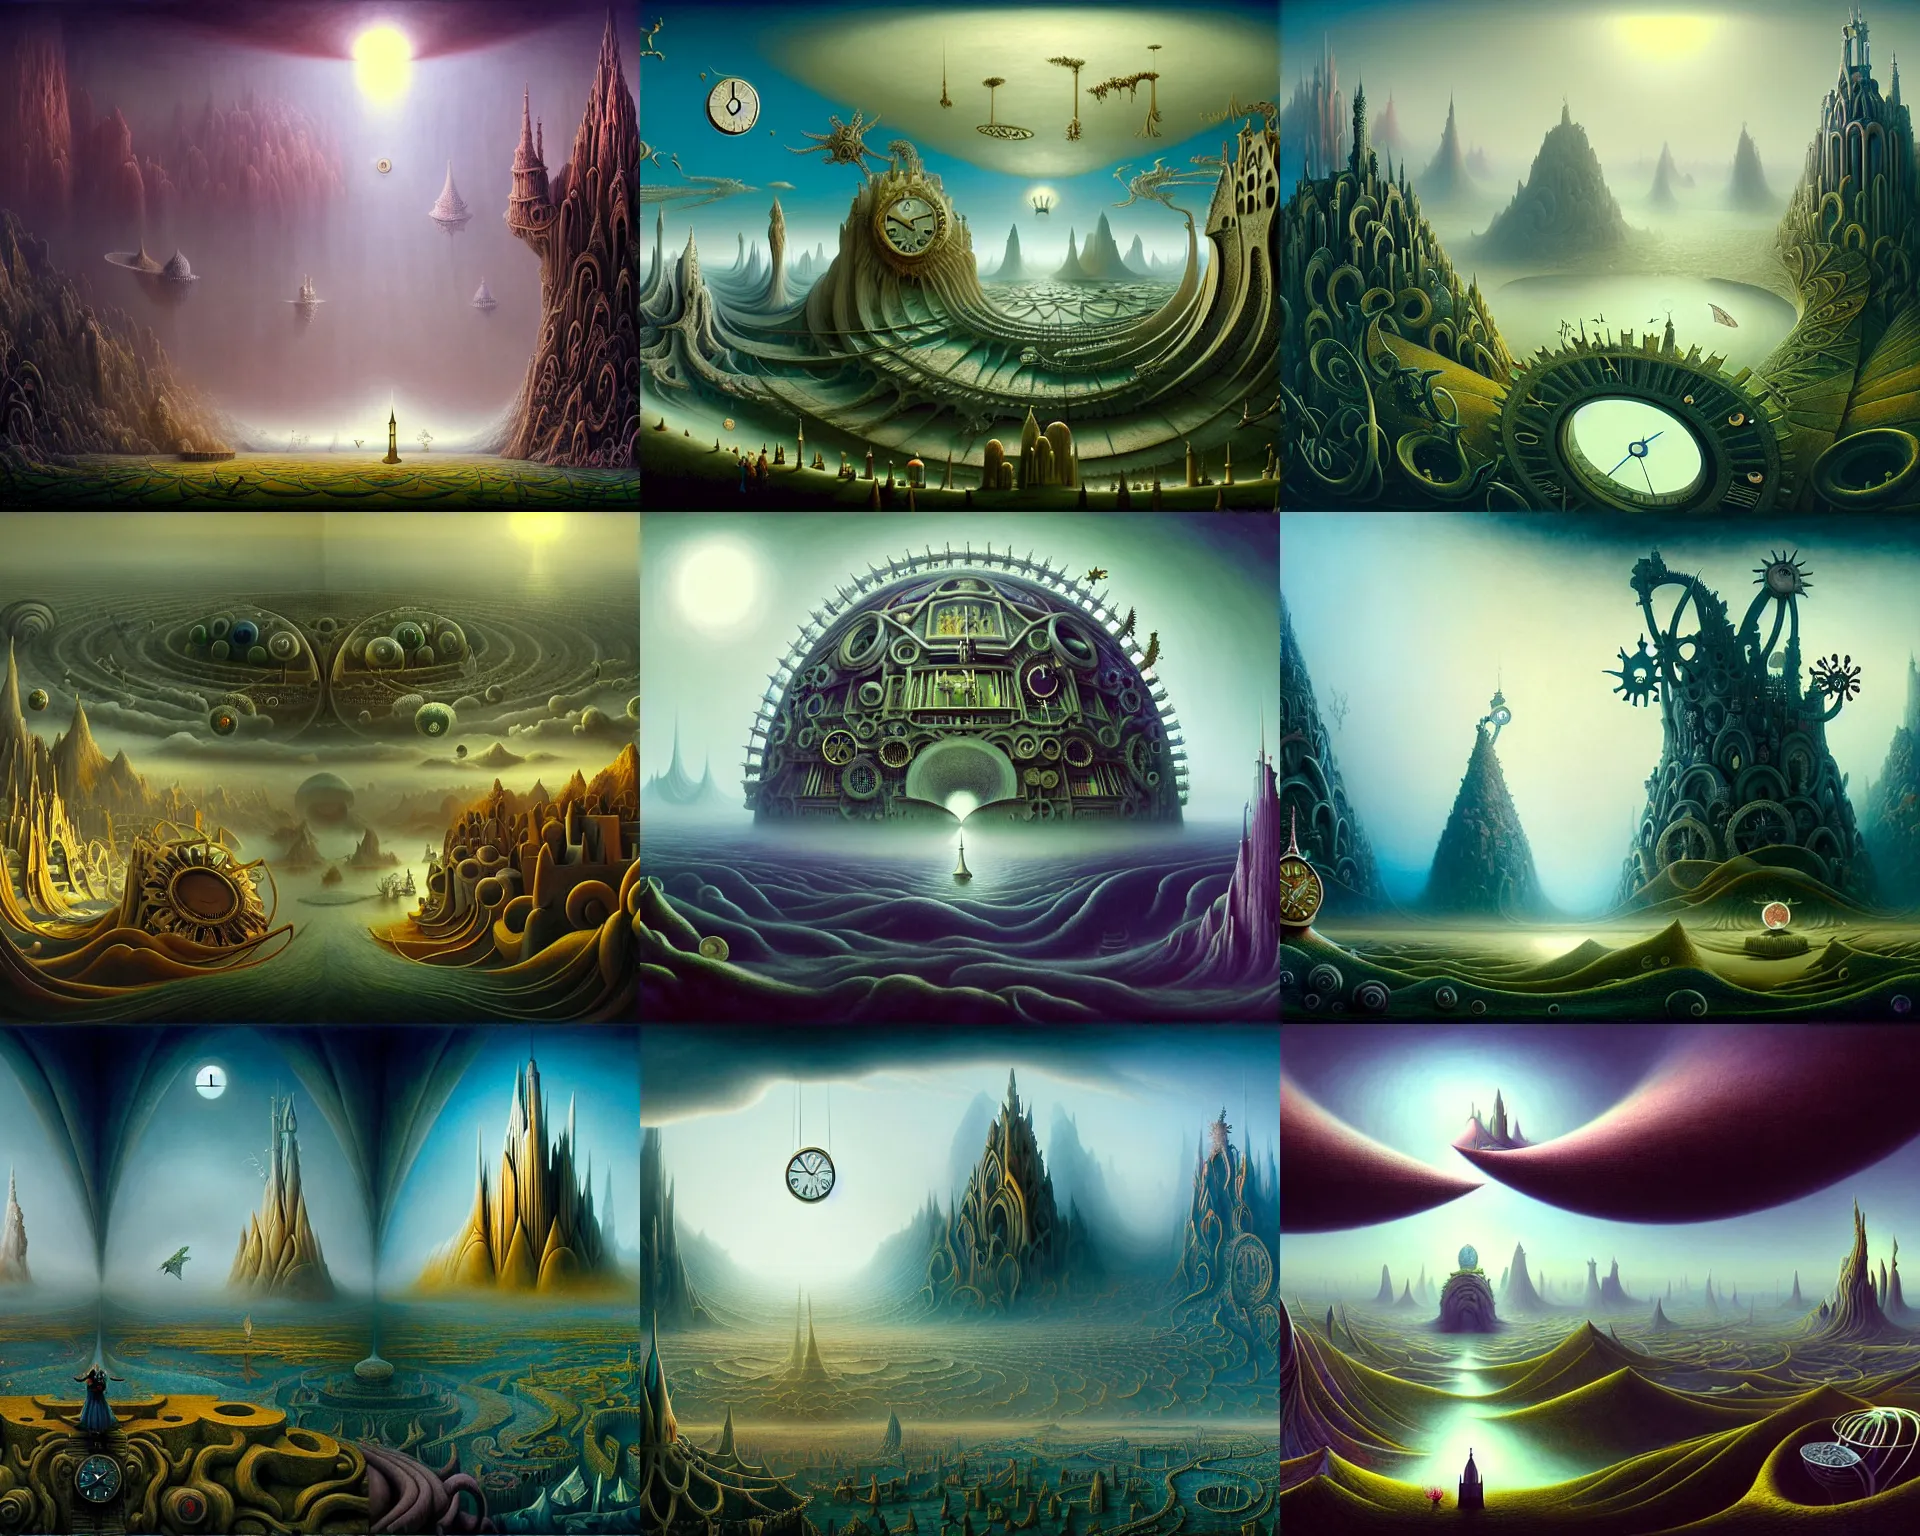 Prompt: a beguiling epic stunning beautiful and insanely detailed matte painting of dream worlds, the land of clocks and gears at the end of space and time with surreal architecture designed by Heironymous Bosch, with mega structures inspired by Heironymous Bosch's Garden of Earthly Delights, vast surreal landscape and horizon by Cyril Rolando and Natalie Shau and Beksinski, masterpiece!!!, grand!, imaginative!!!, whimsical!!, epic scale, intricate details, sense of awe, elite, wonder, insanely complex, masterful composition!!!, sharp focus, fantasy realism, dramatic lighting